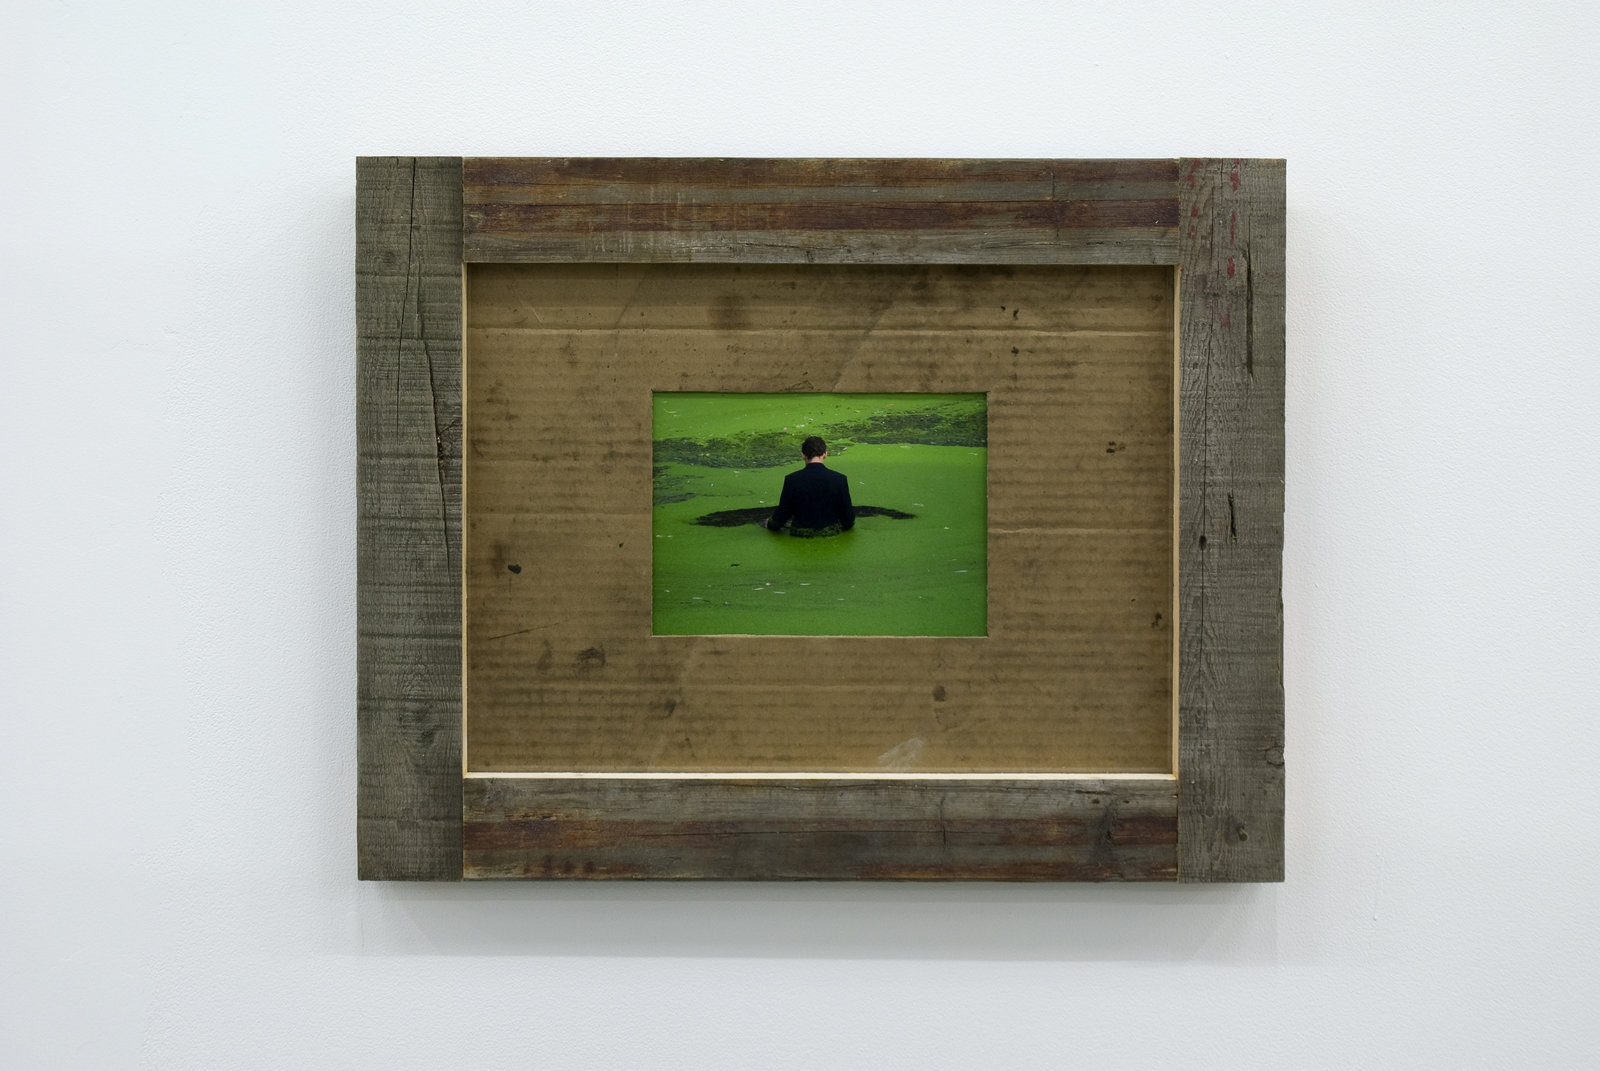 Ashes Withyman, Untitled from Uncertain Pilgrimage, 2006-2009, lightjet print, found wood frame, cardboard, 17 x 22 x 2 in. (44 x 55 x 4 cm)
 